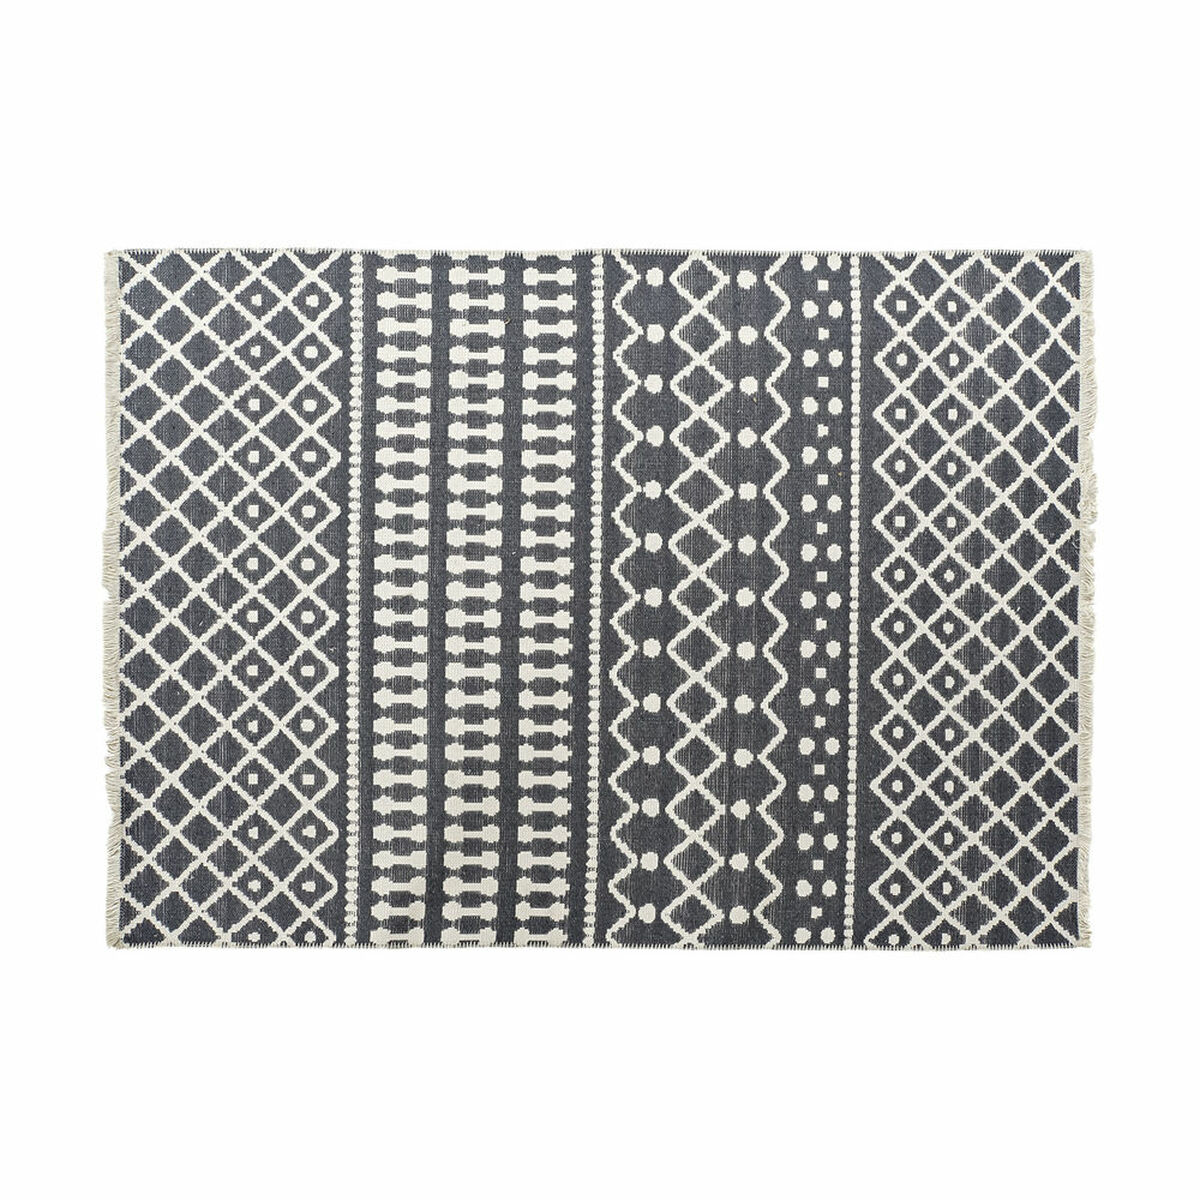 Vaip DKD Home Decor Valge Polüester Puuvill Gris Oscuro (160 x 230 x 1 cm)